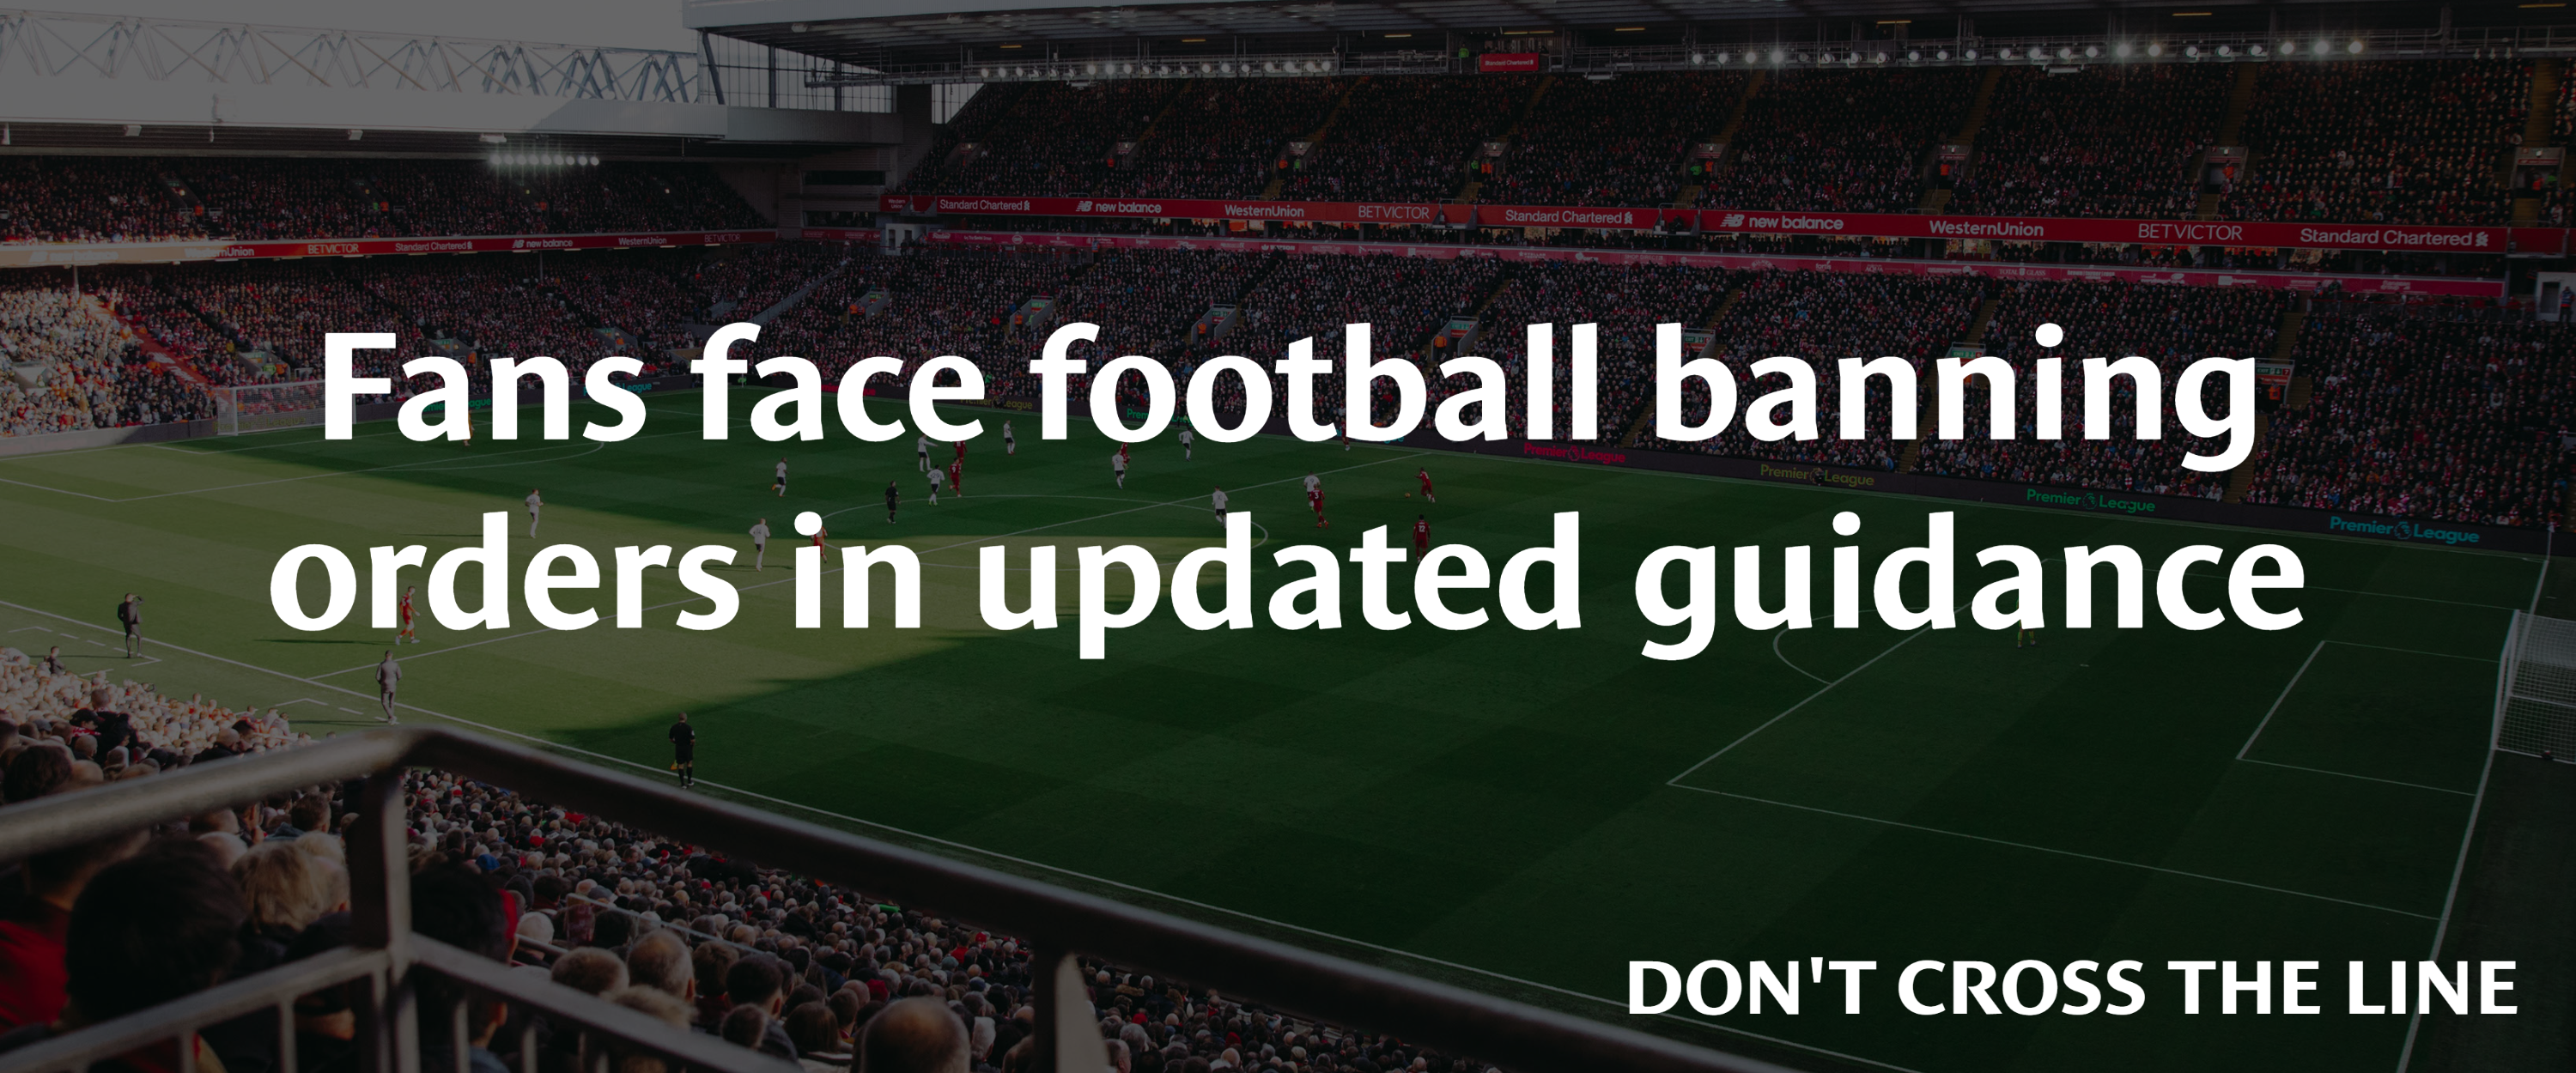 Graphic showing football pitch with text reading 'Fans face football banning orders in updated guidance'